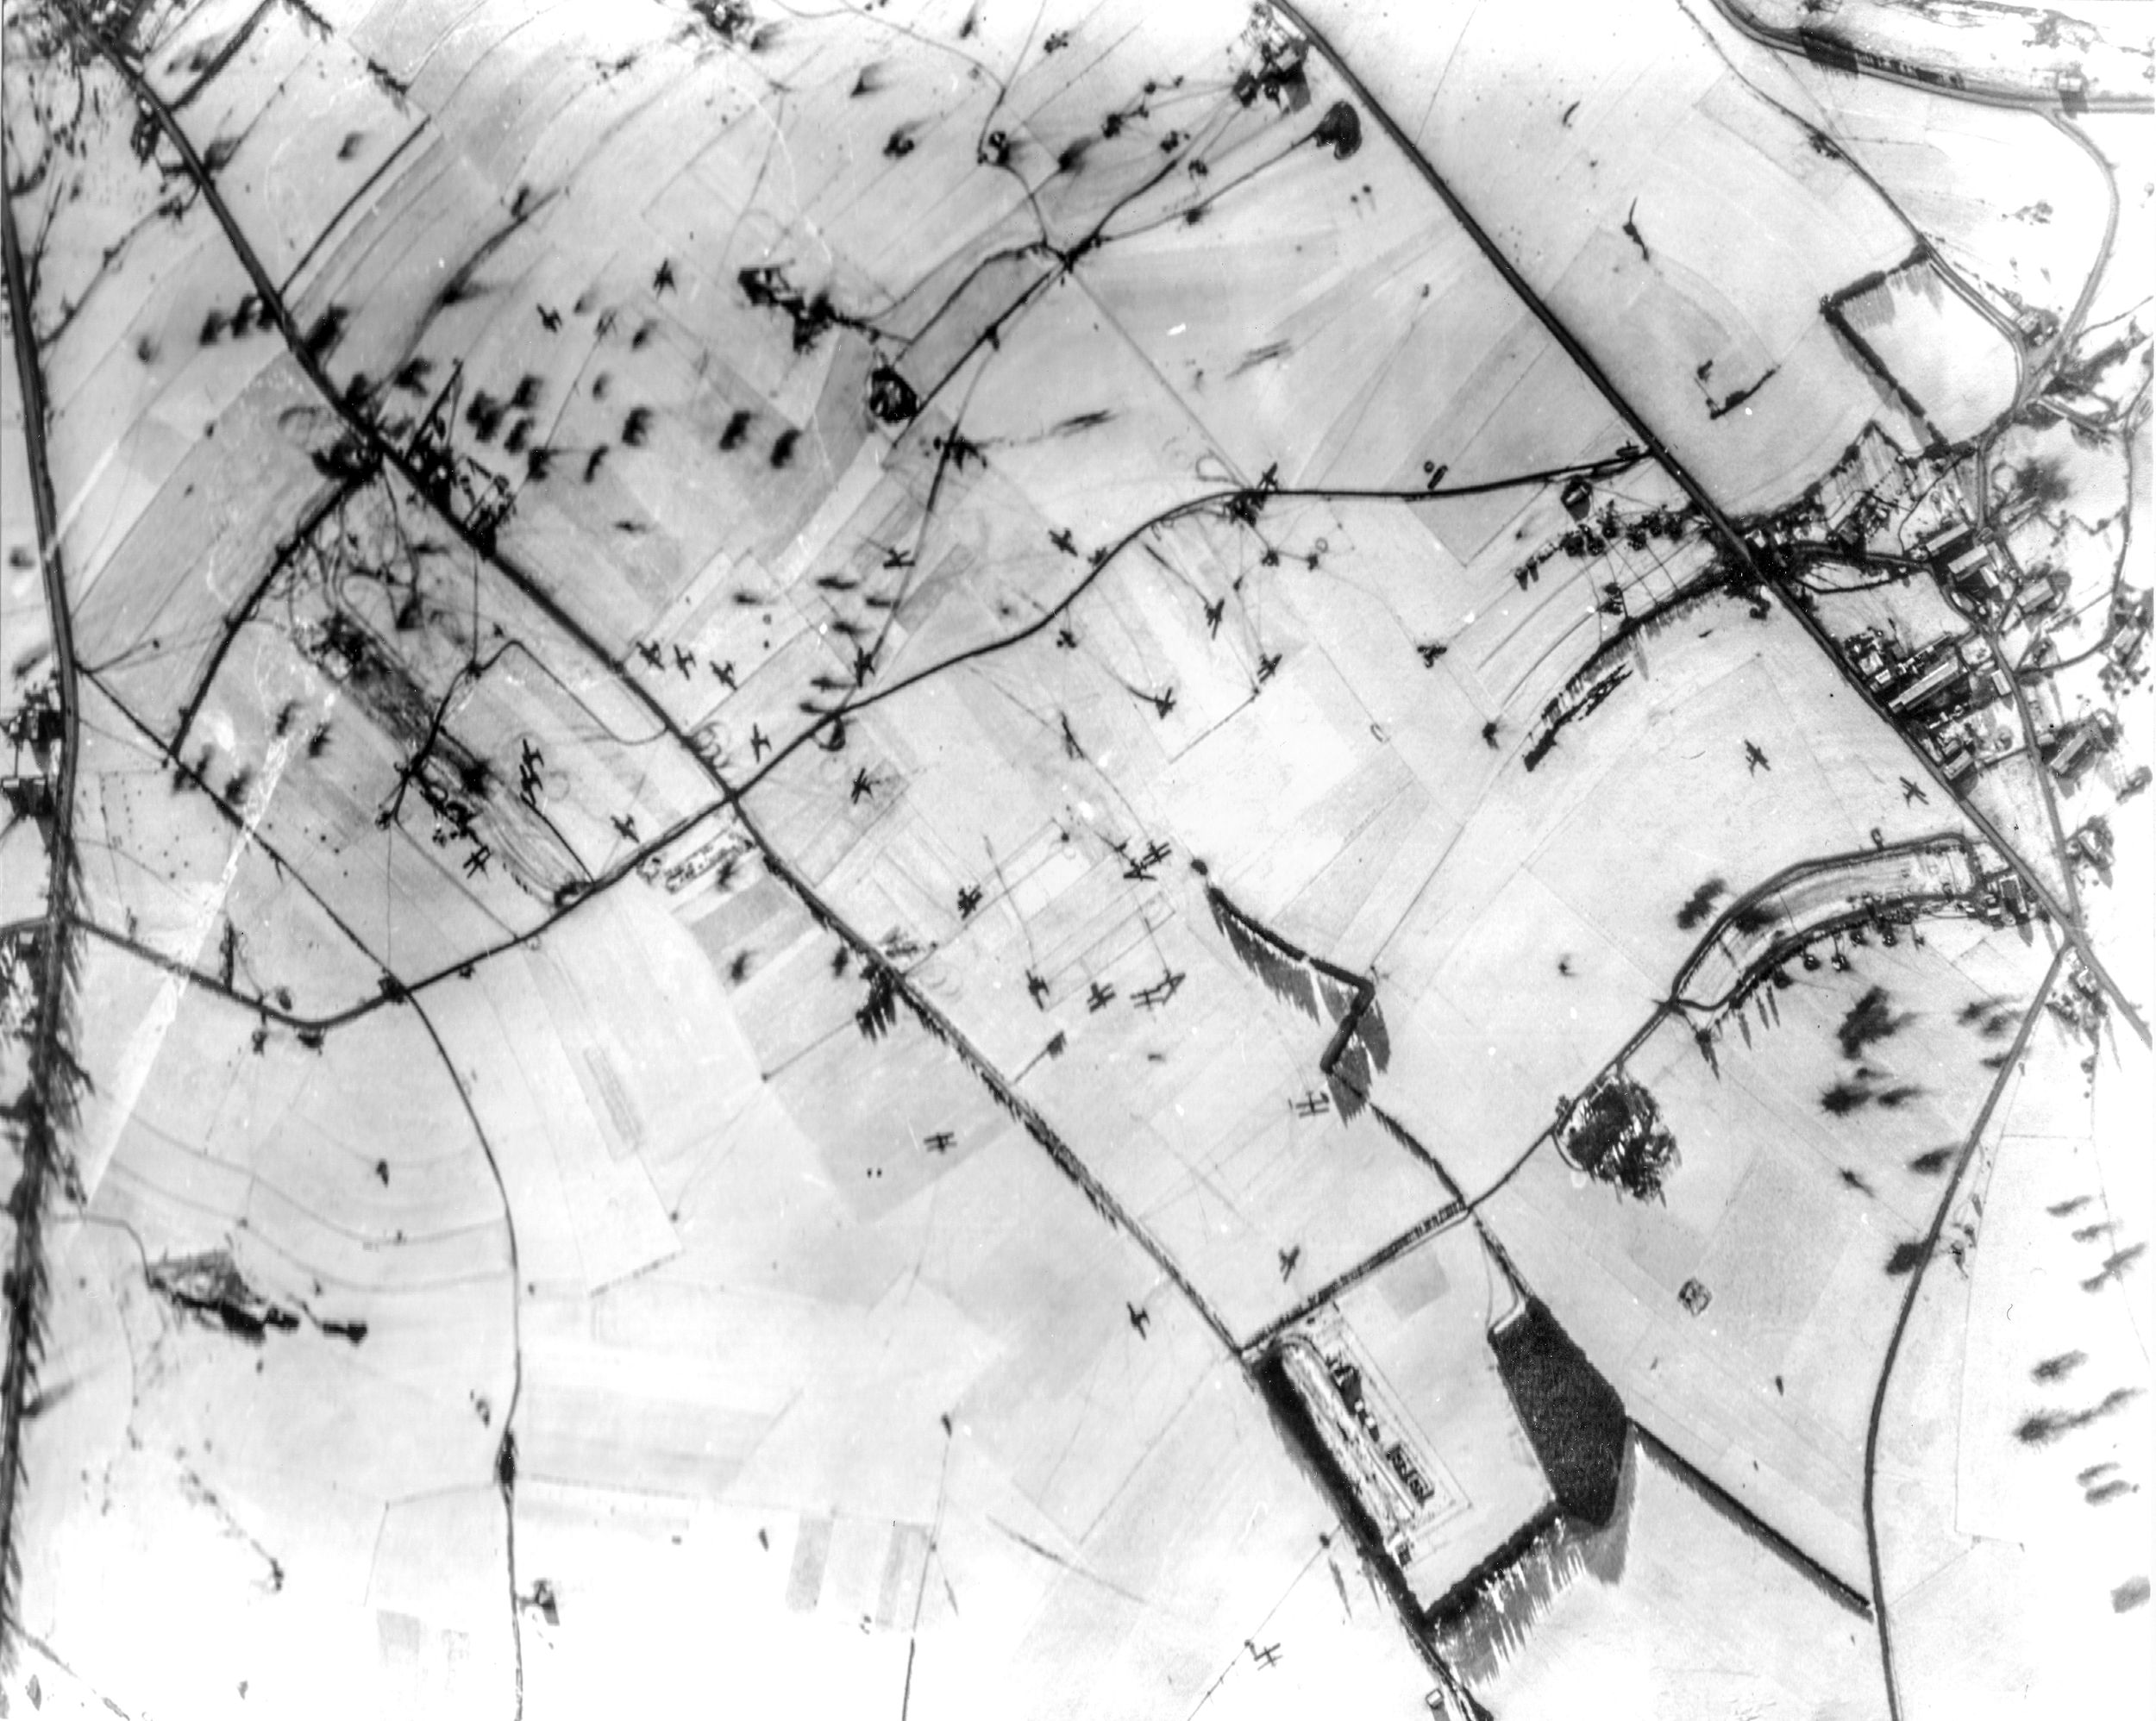 Gliders litter a frozen field near Bastogne during the Battle of the Bulge. Despite horrific losses, glider pilots delivered 100,000 pounds of cargo in one day to the surrounded troops at Bastogne. Sliding to a stop on frozen farm fields was a harrowing experience.